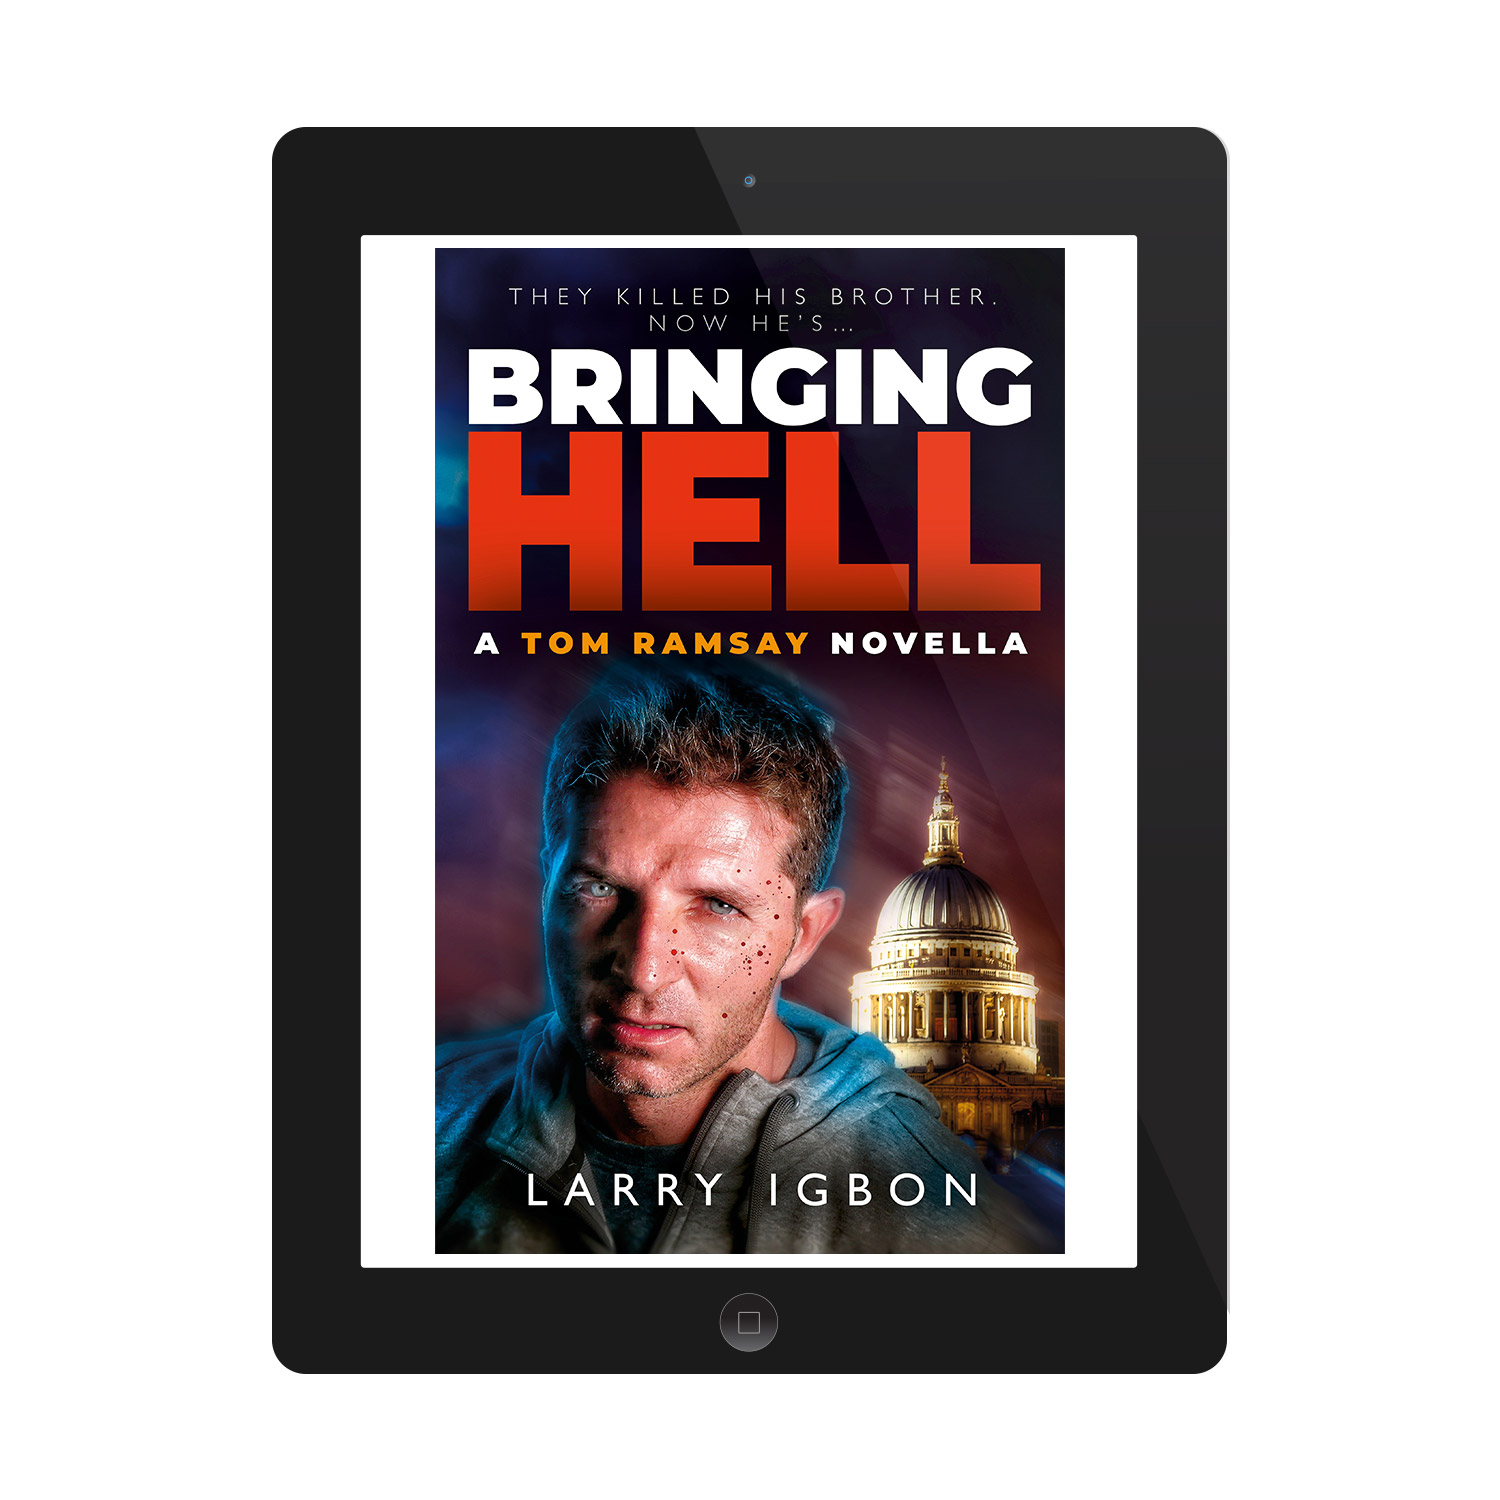 'Bringing Hell' is a hard-bitten revenge thriller. The author is Larry Igbon. The book cover design and interior formatting are by Mark Thomas. To learn more about what Mark could do for your book, please visit coverness.com.